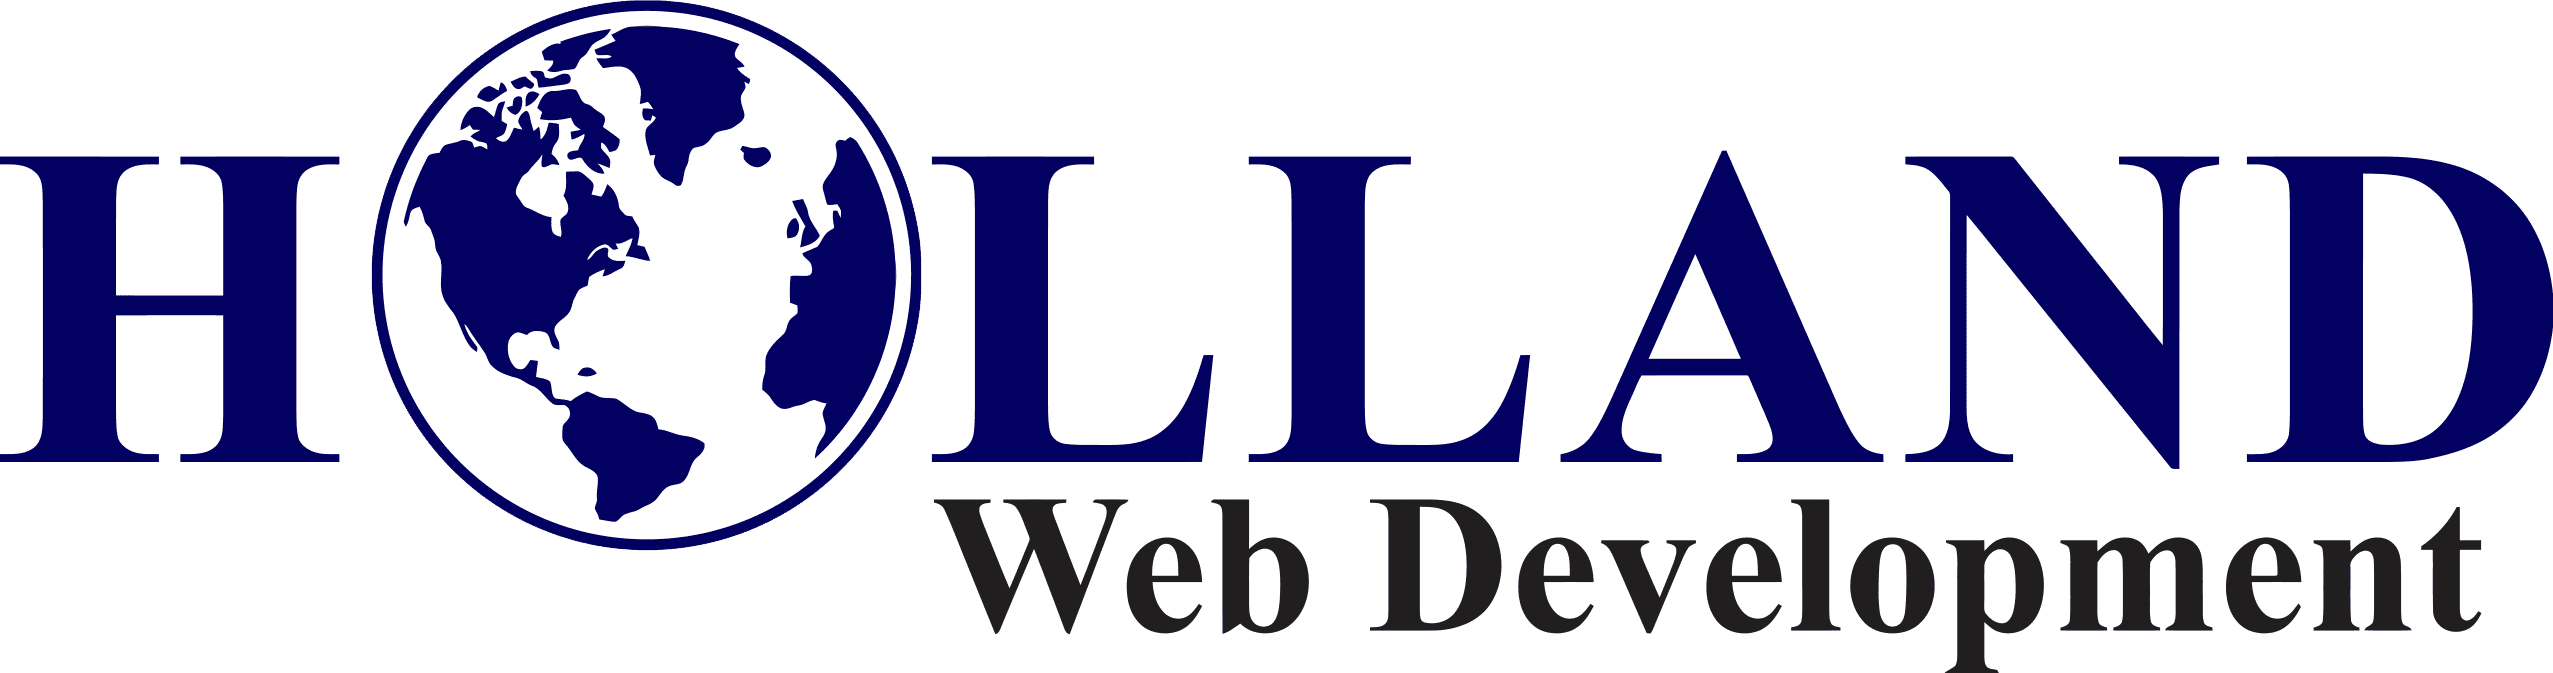 Developed and Donated by: Holland Web Development